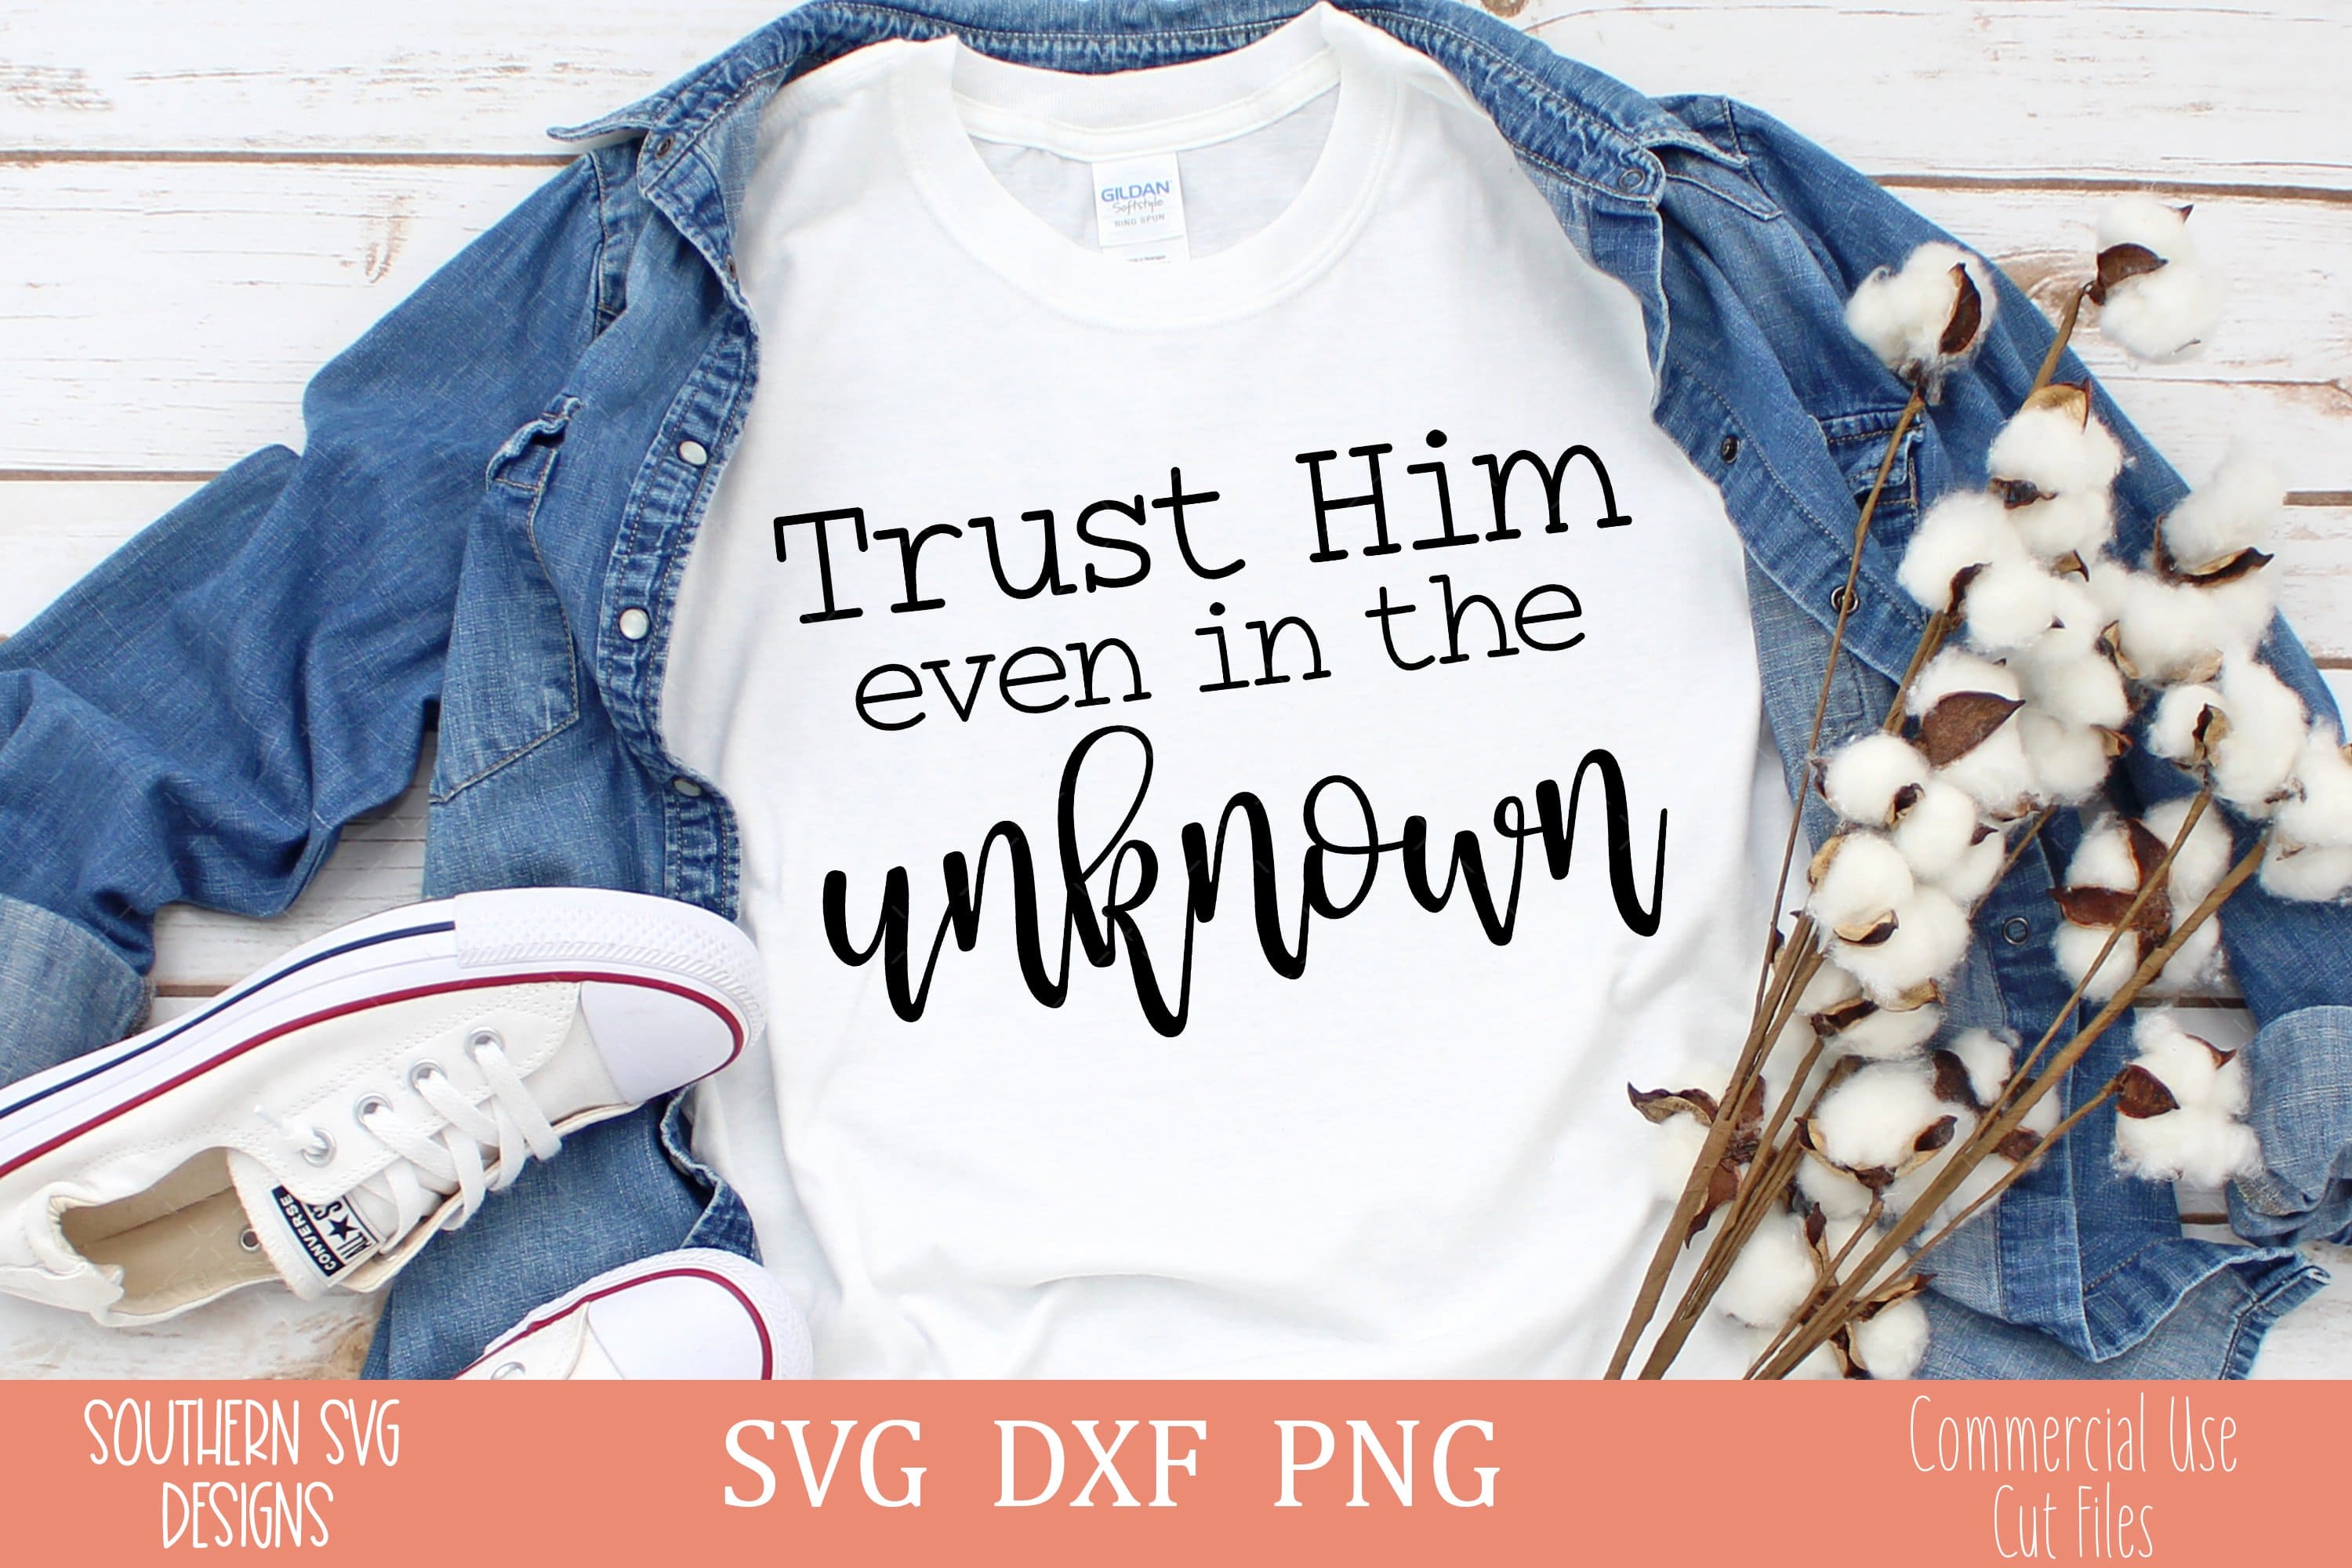 Inscription "trust him even in the unknown" on the white t-shirt.